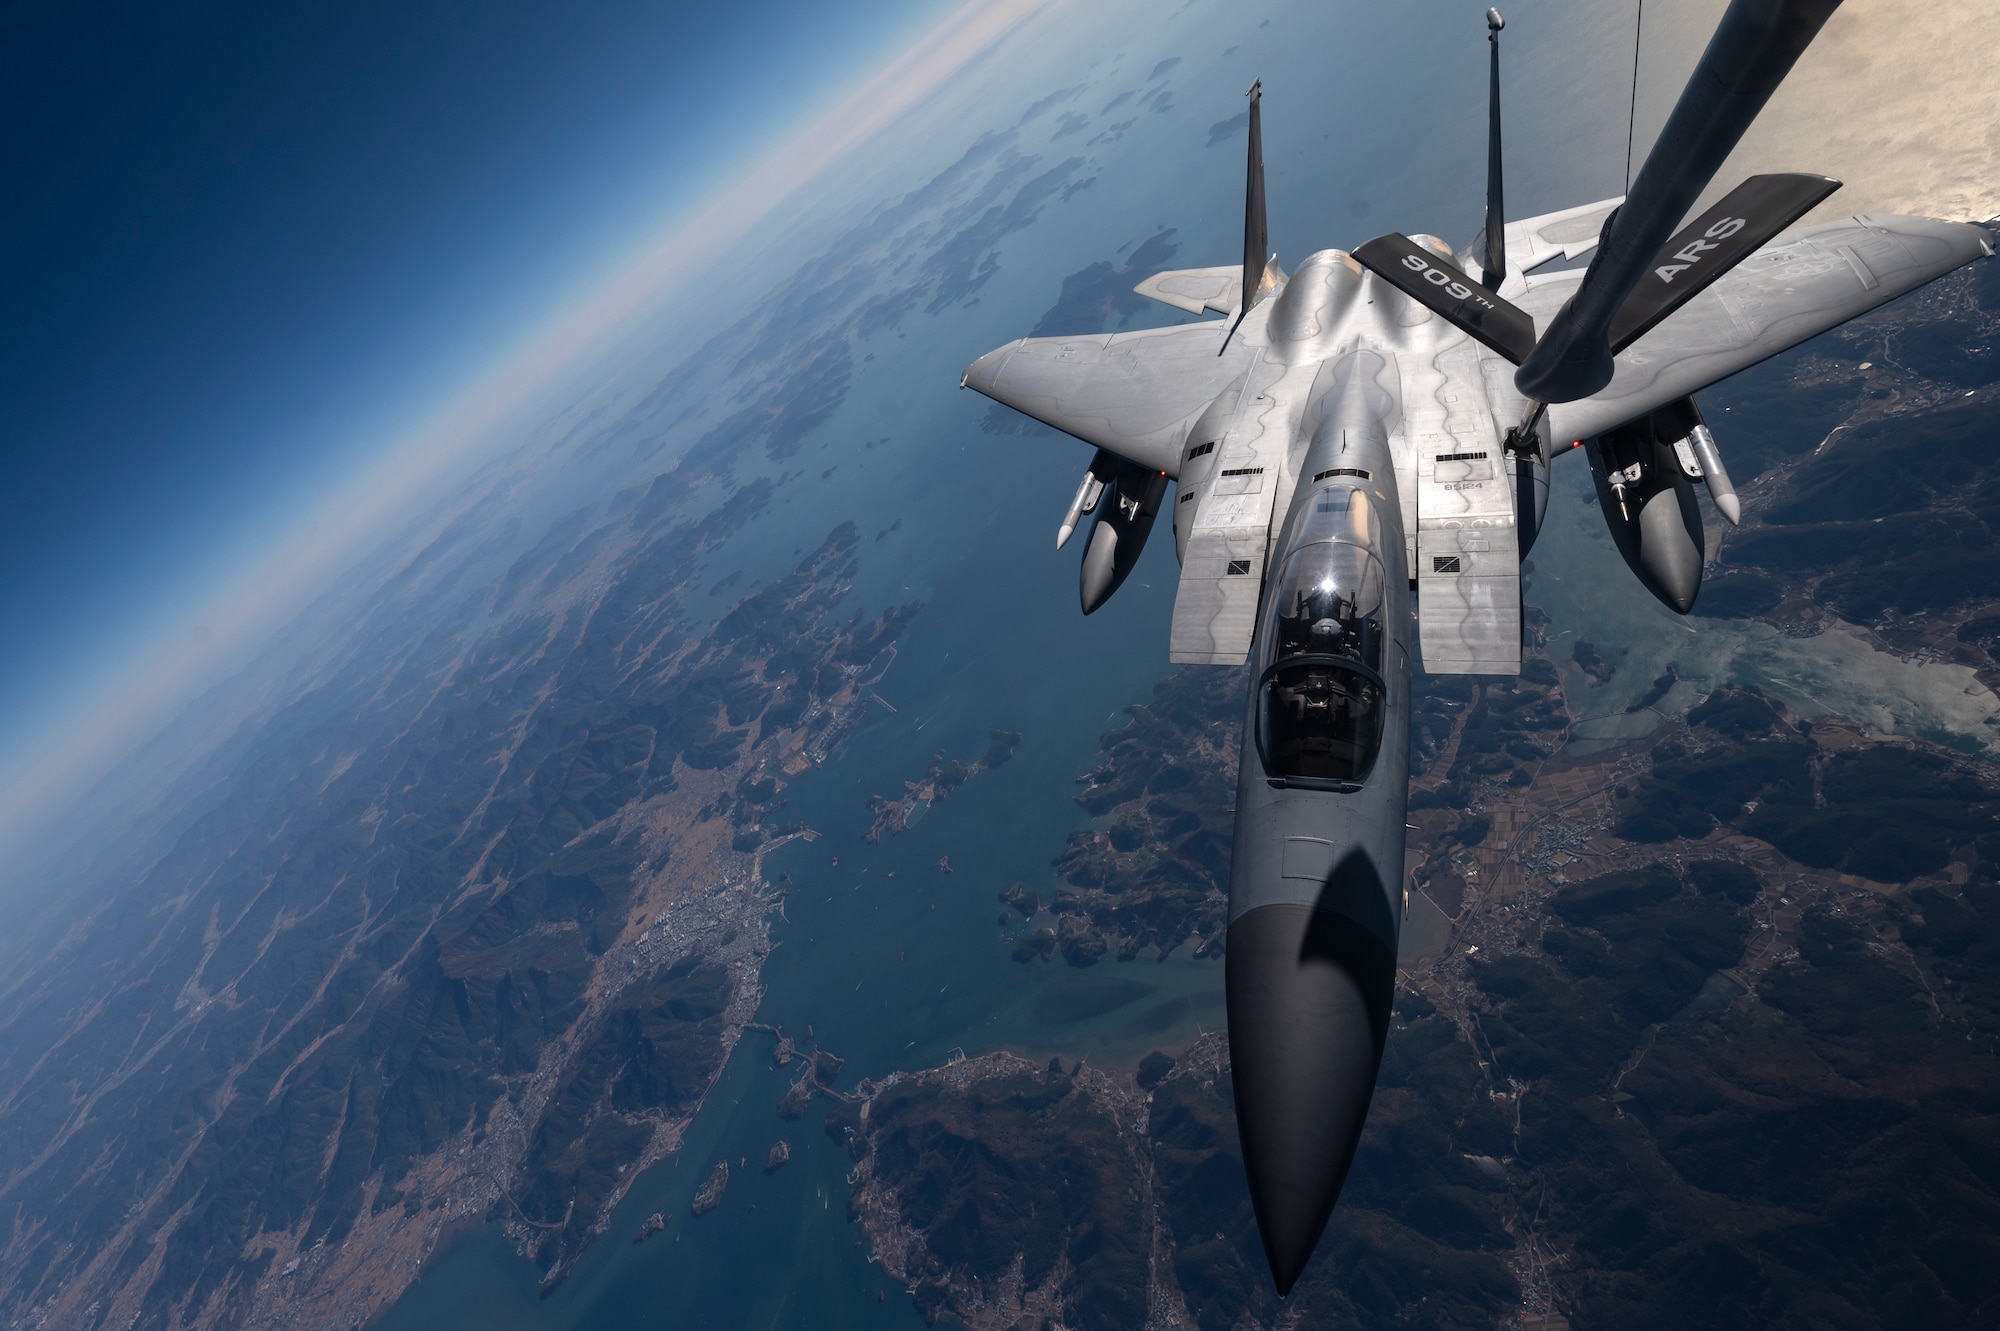 A U.S. Air Force 44th Fighter Squadron F-15C Eagle receives fuel from a 909th Air Refueling Squadron KC-135 Stratotanker over South Korea, Nov. 4, 2022. Kadena received its first F-15 C's in 1979. Since then, the tactical fighter has provided unmatched air superiority for the Indo-Pacific region. (U.S. Air Force photo by Senior Airman Jessi Roth)